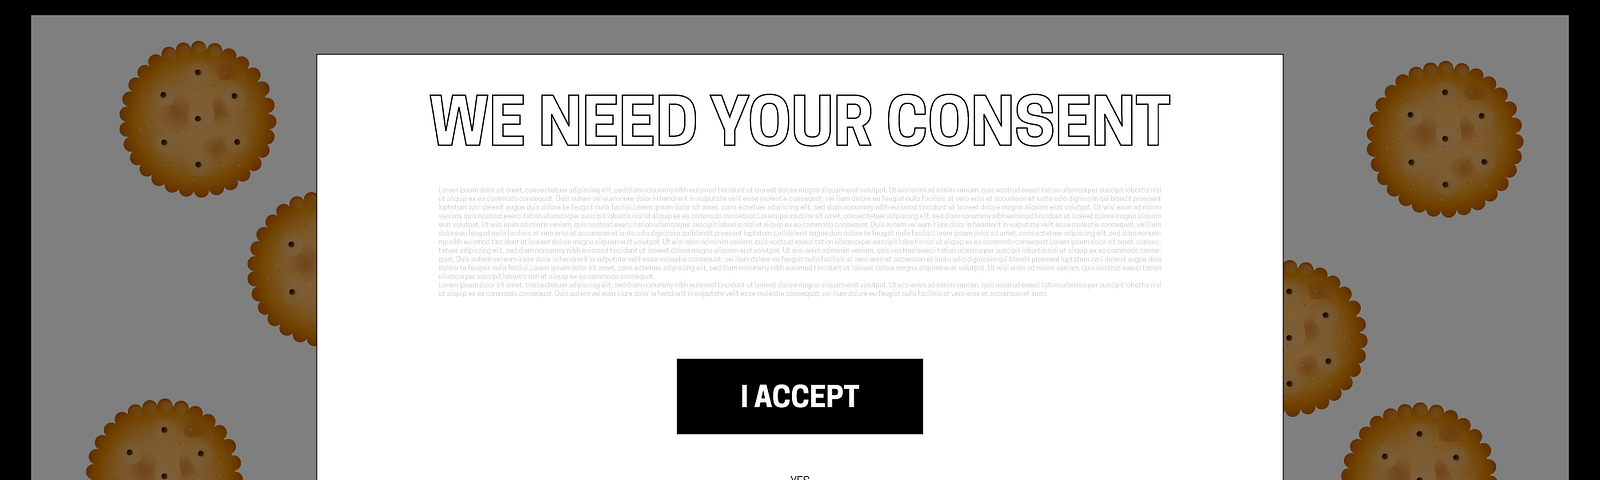 Graphic: Data tracking consent window. “We need your consent.” Button “I Accept” Other options: Yes / Learn More